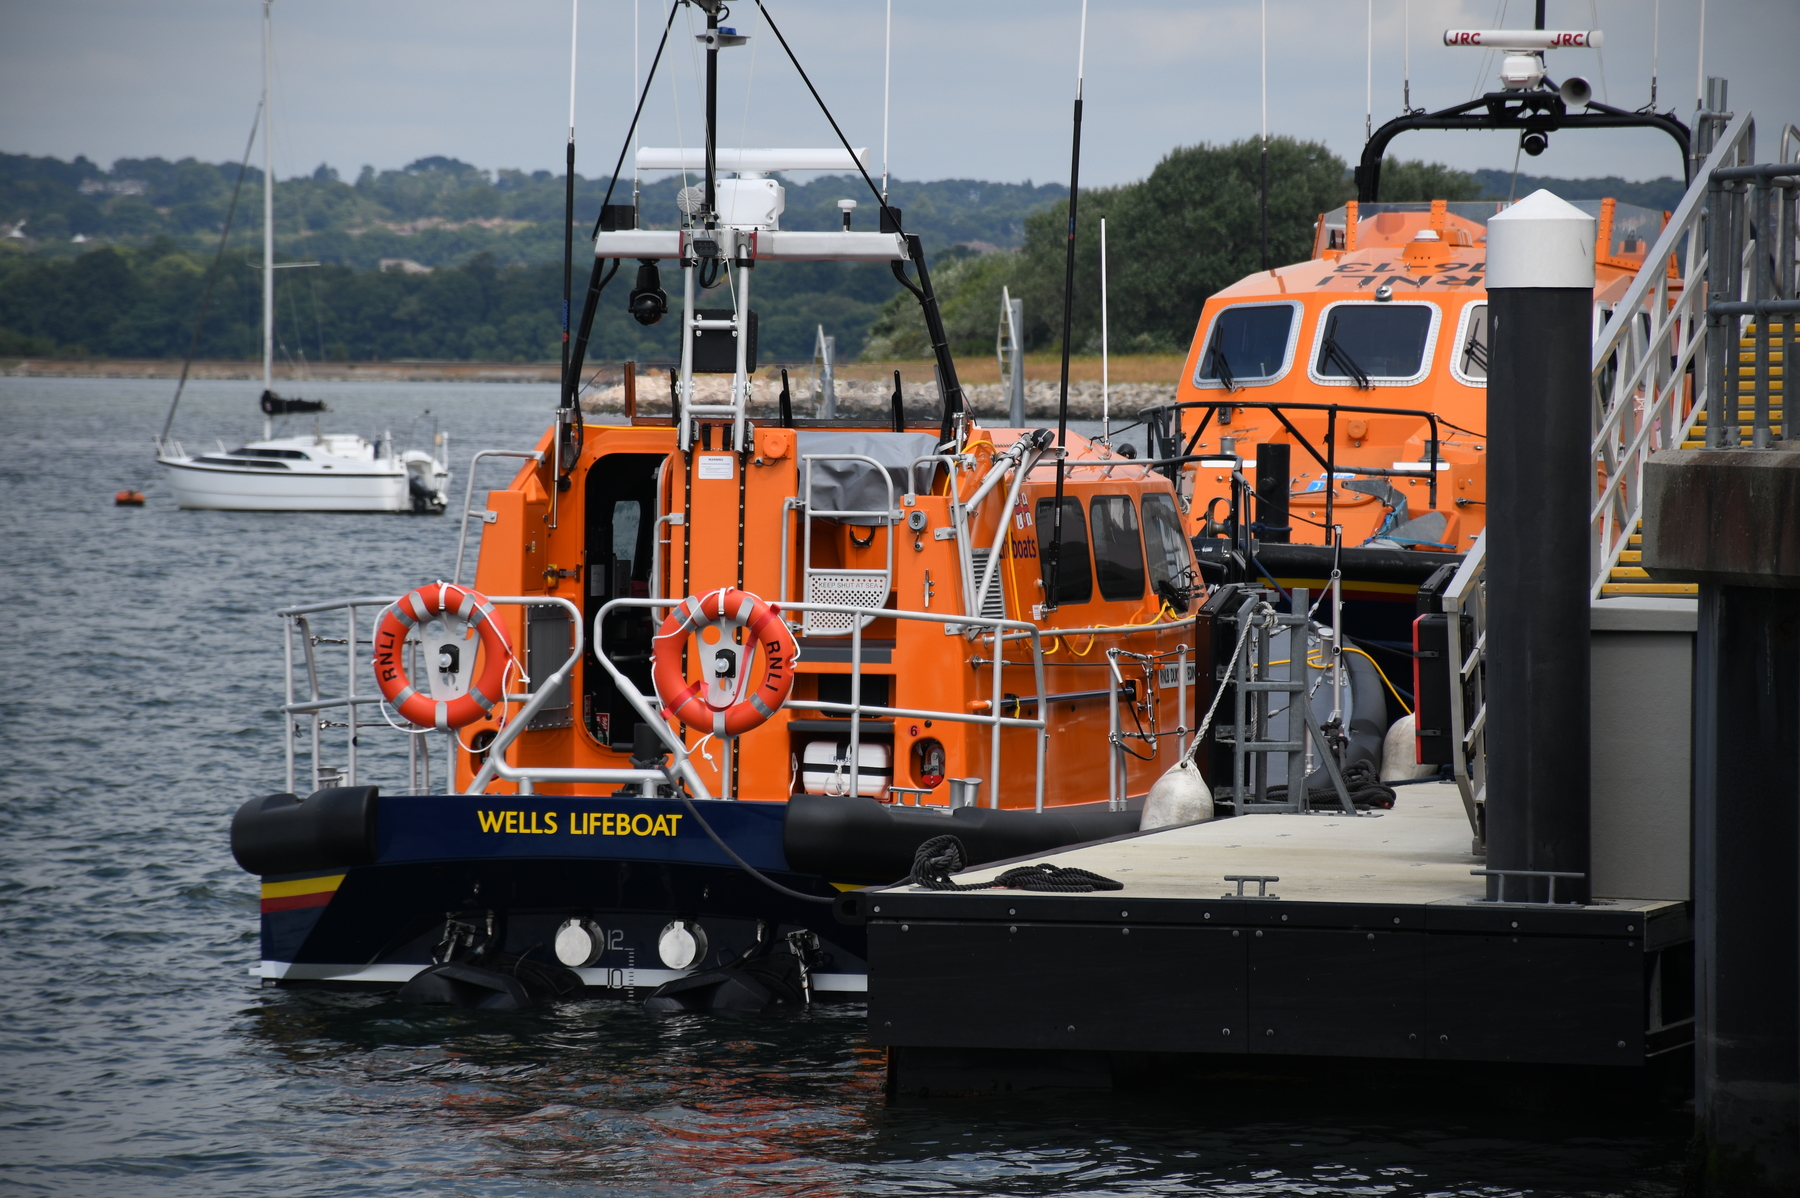 The future 'Wells Lifeboat' on the pontoon awaiting systems commissioning, tests and sea trials